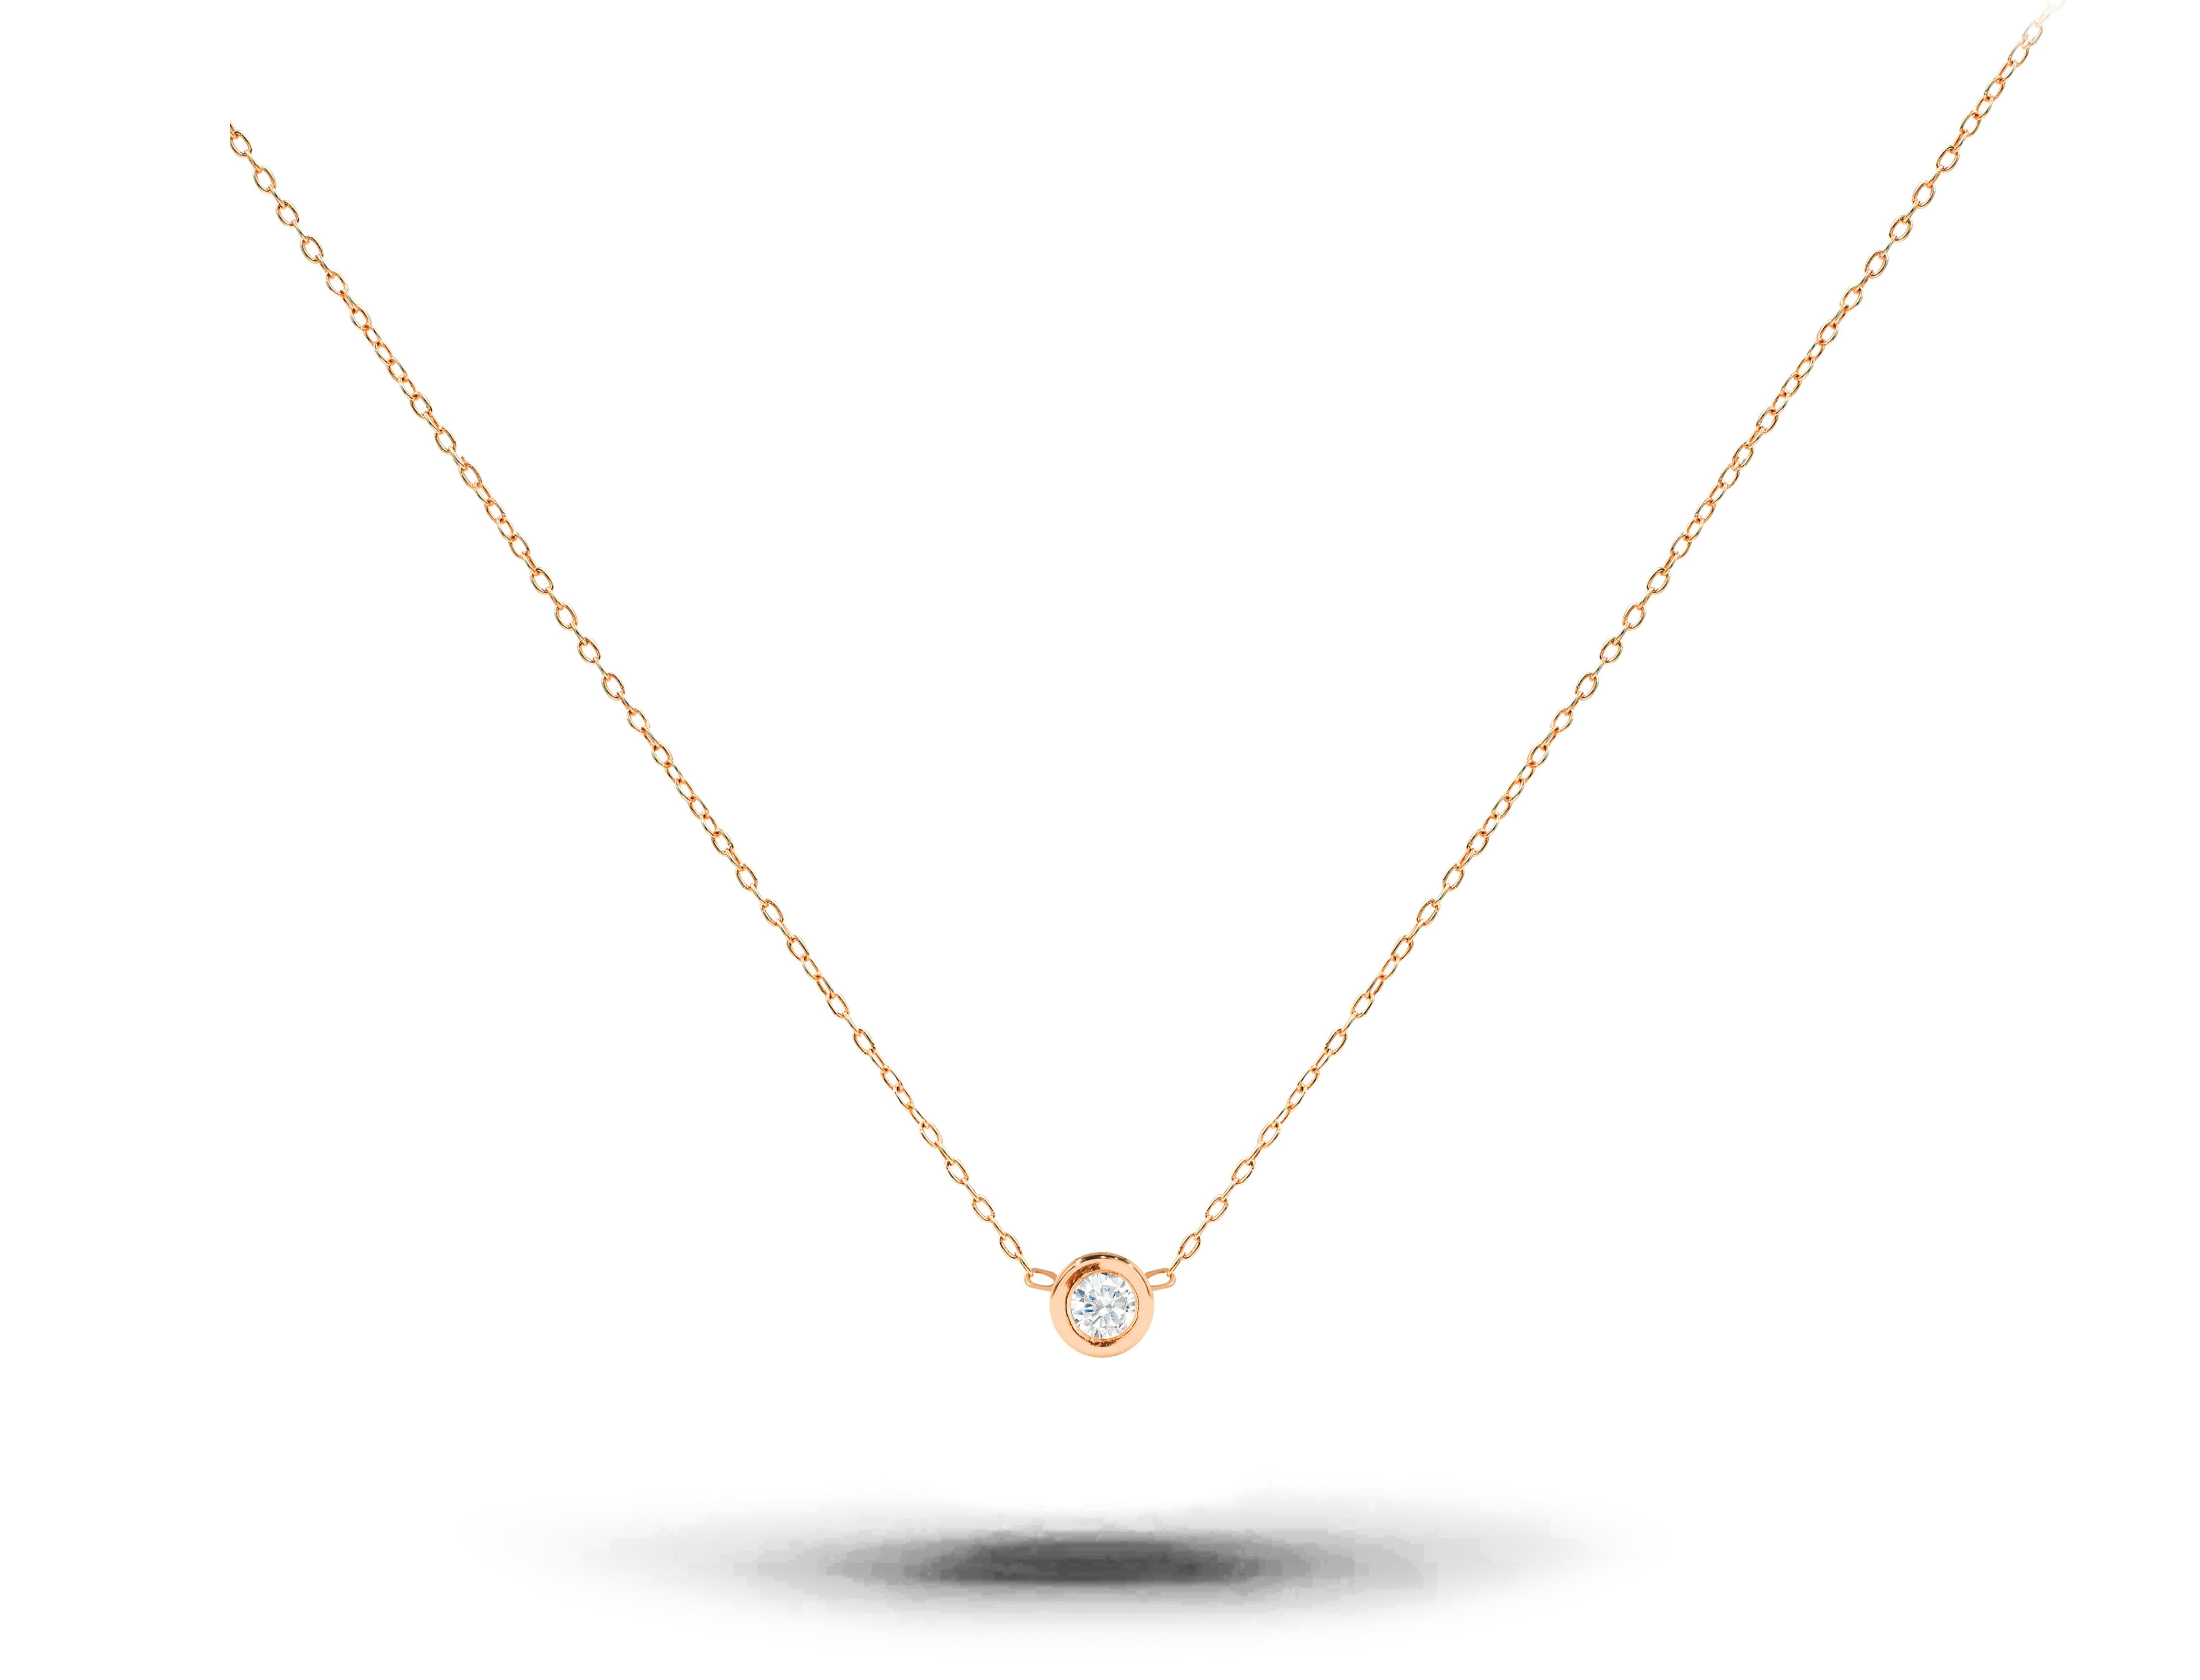 A brilliant white sparkly natural solitaire diamond necklace in a bezel set comes with a thin gold chain and is a perfect choice for everyday wear. Also called a floating diamond necklace, it would be a perfect gift for any occasion to celebrate her